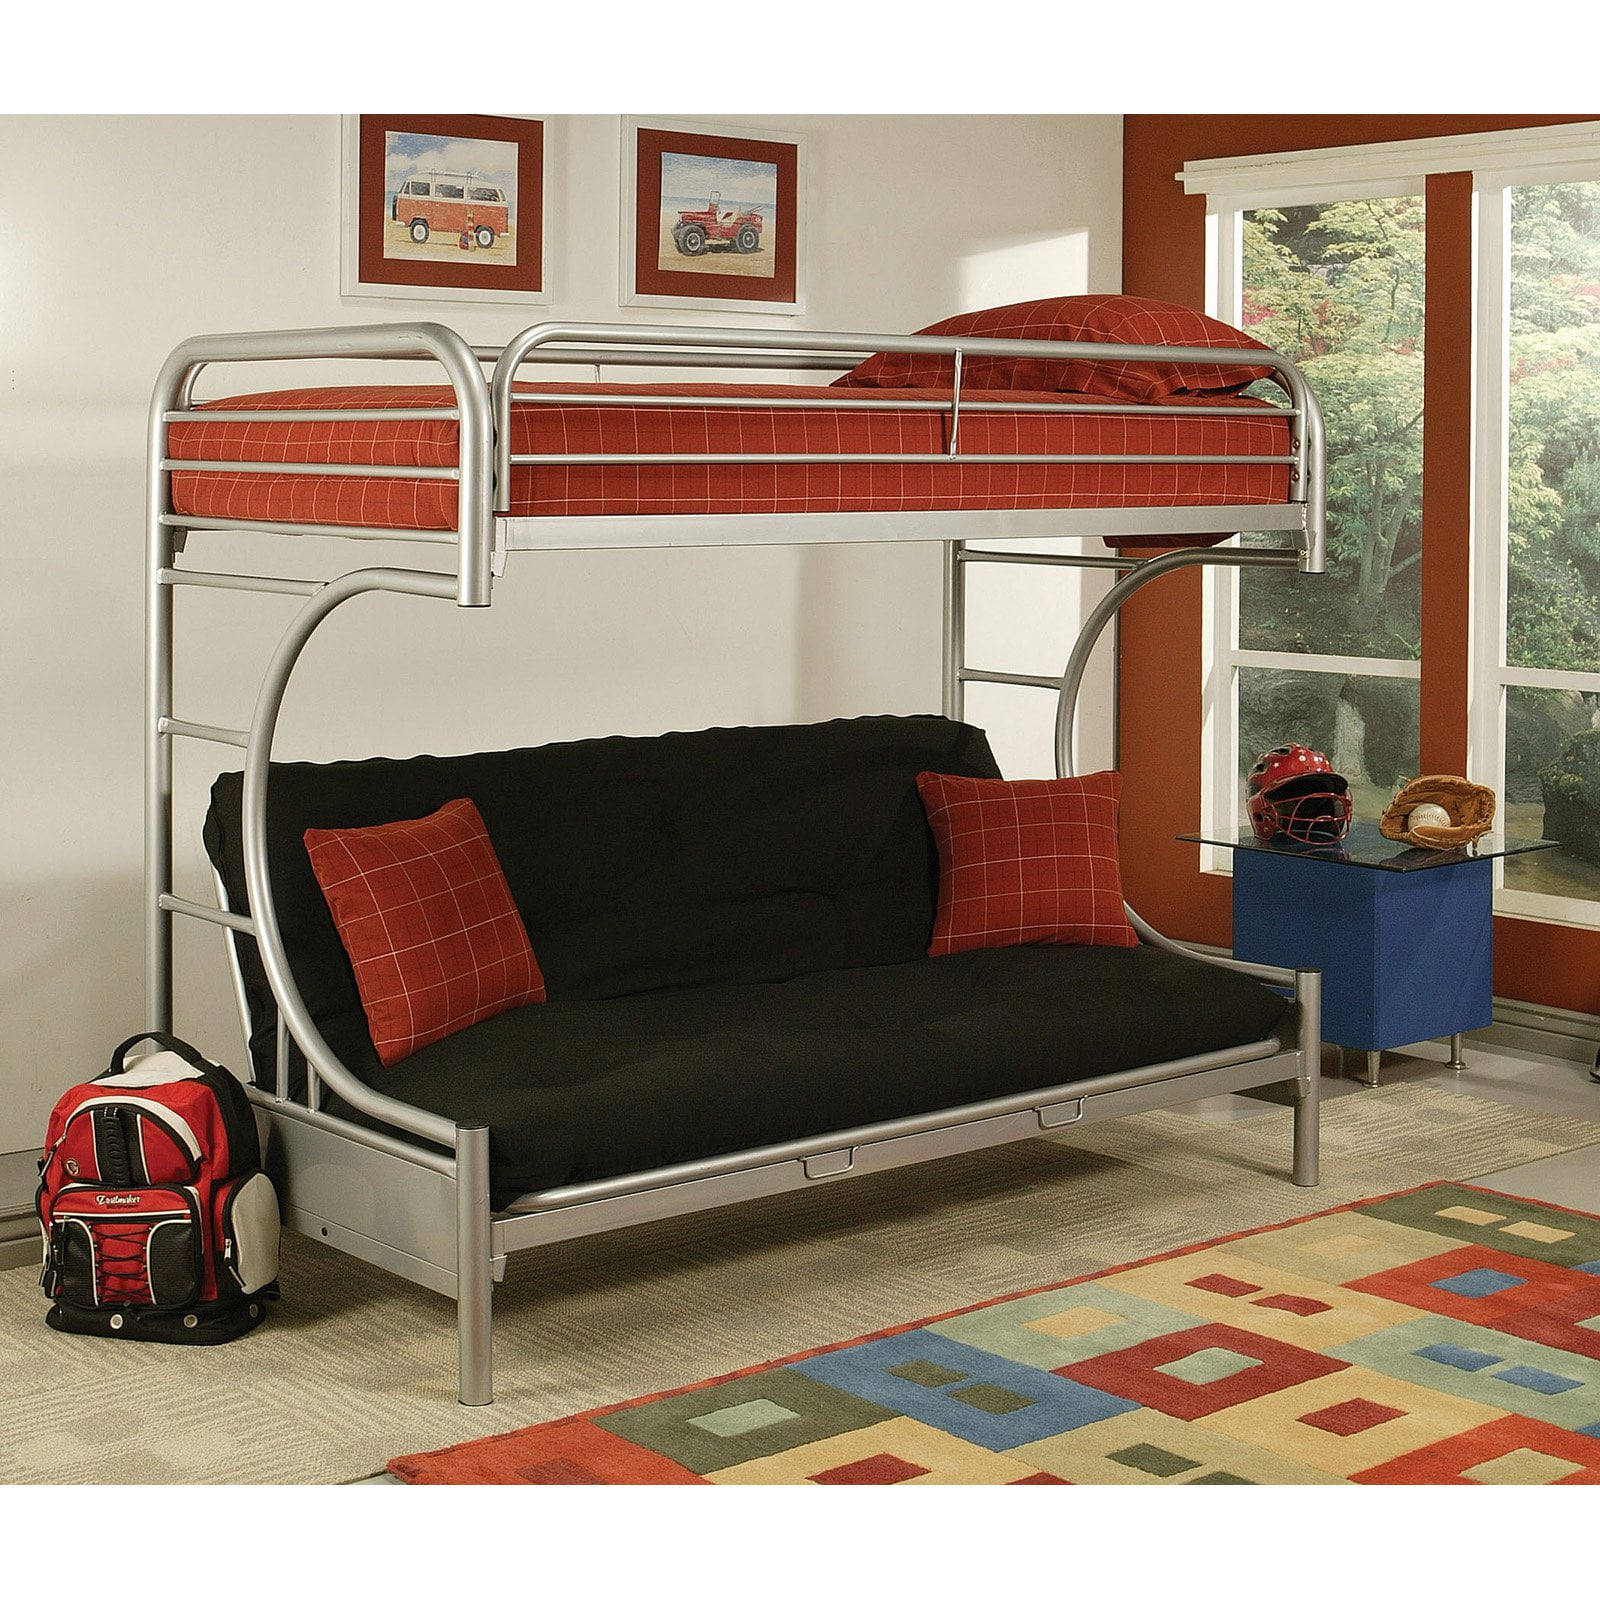 Eclipse Metal Bunk Bed Convertible, Eclipse Twin Over Full Futon Bunk Bed White